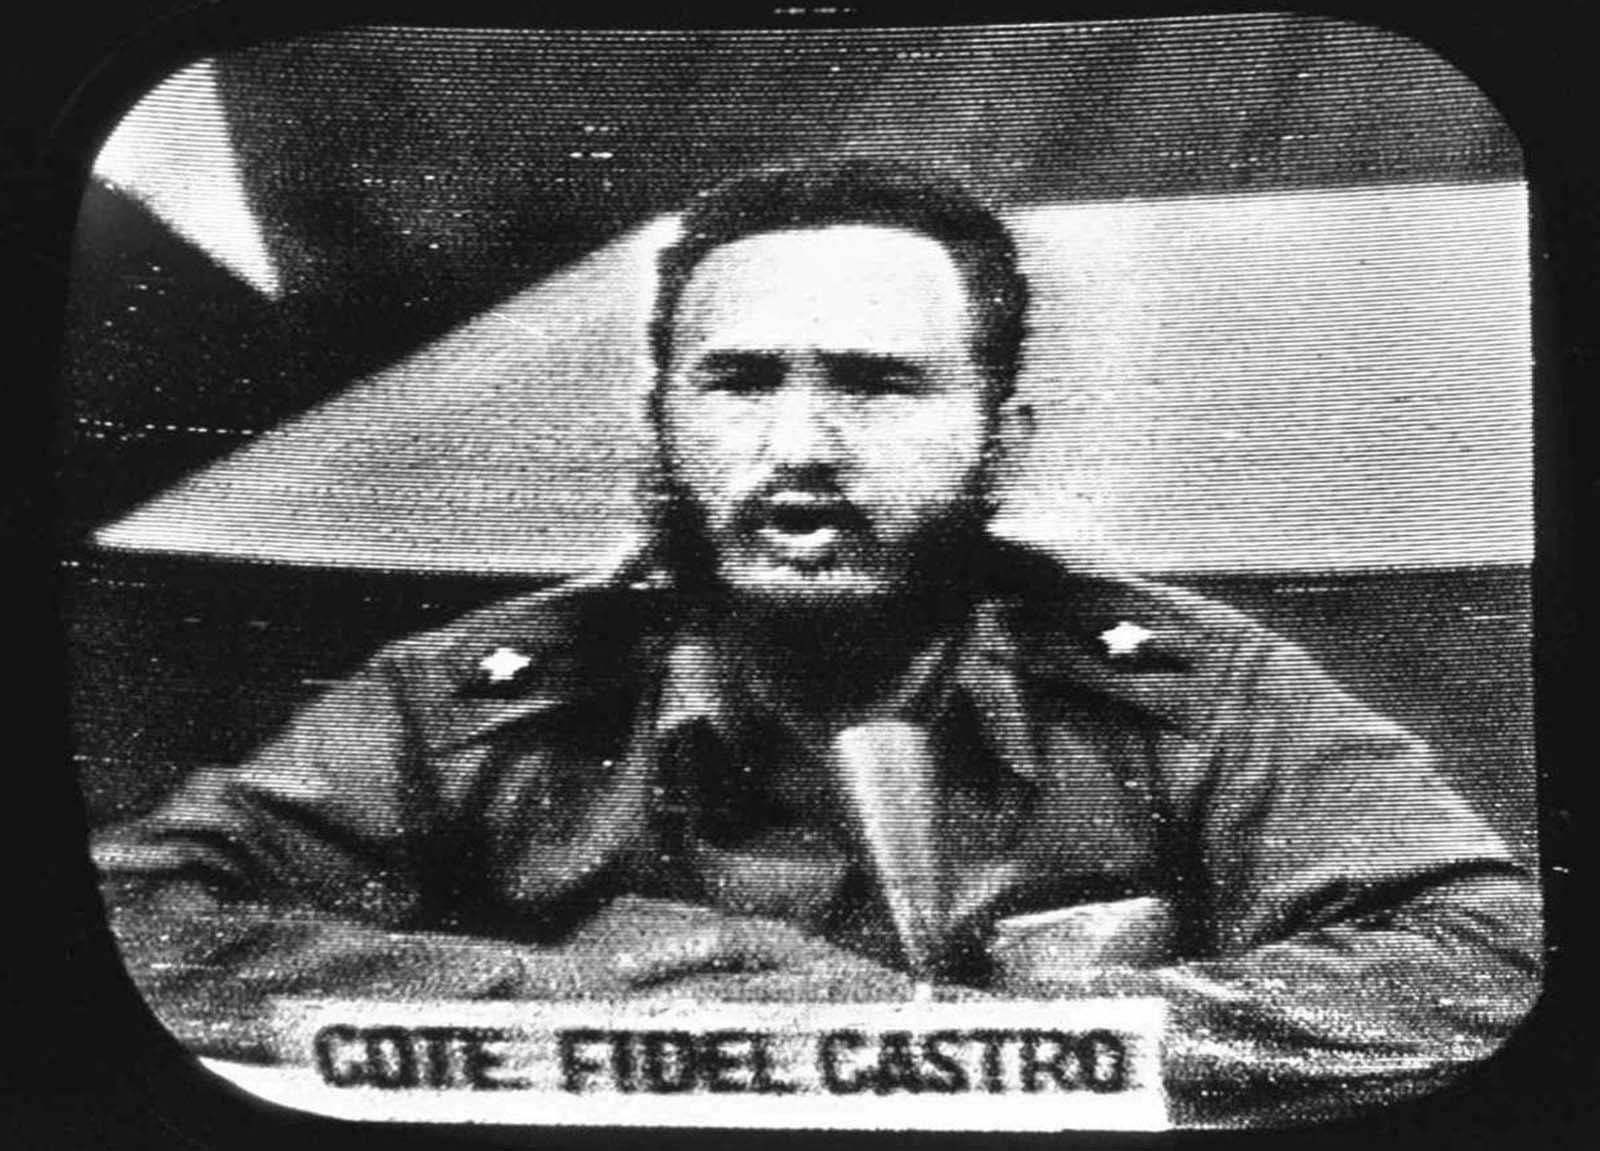 Cuban President Fidel Castro replies to President Kennedy’s naval blockade via Cuban radio and television, on October 23, 1962.